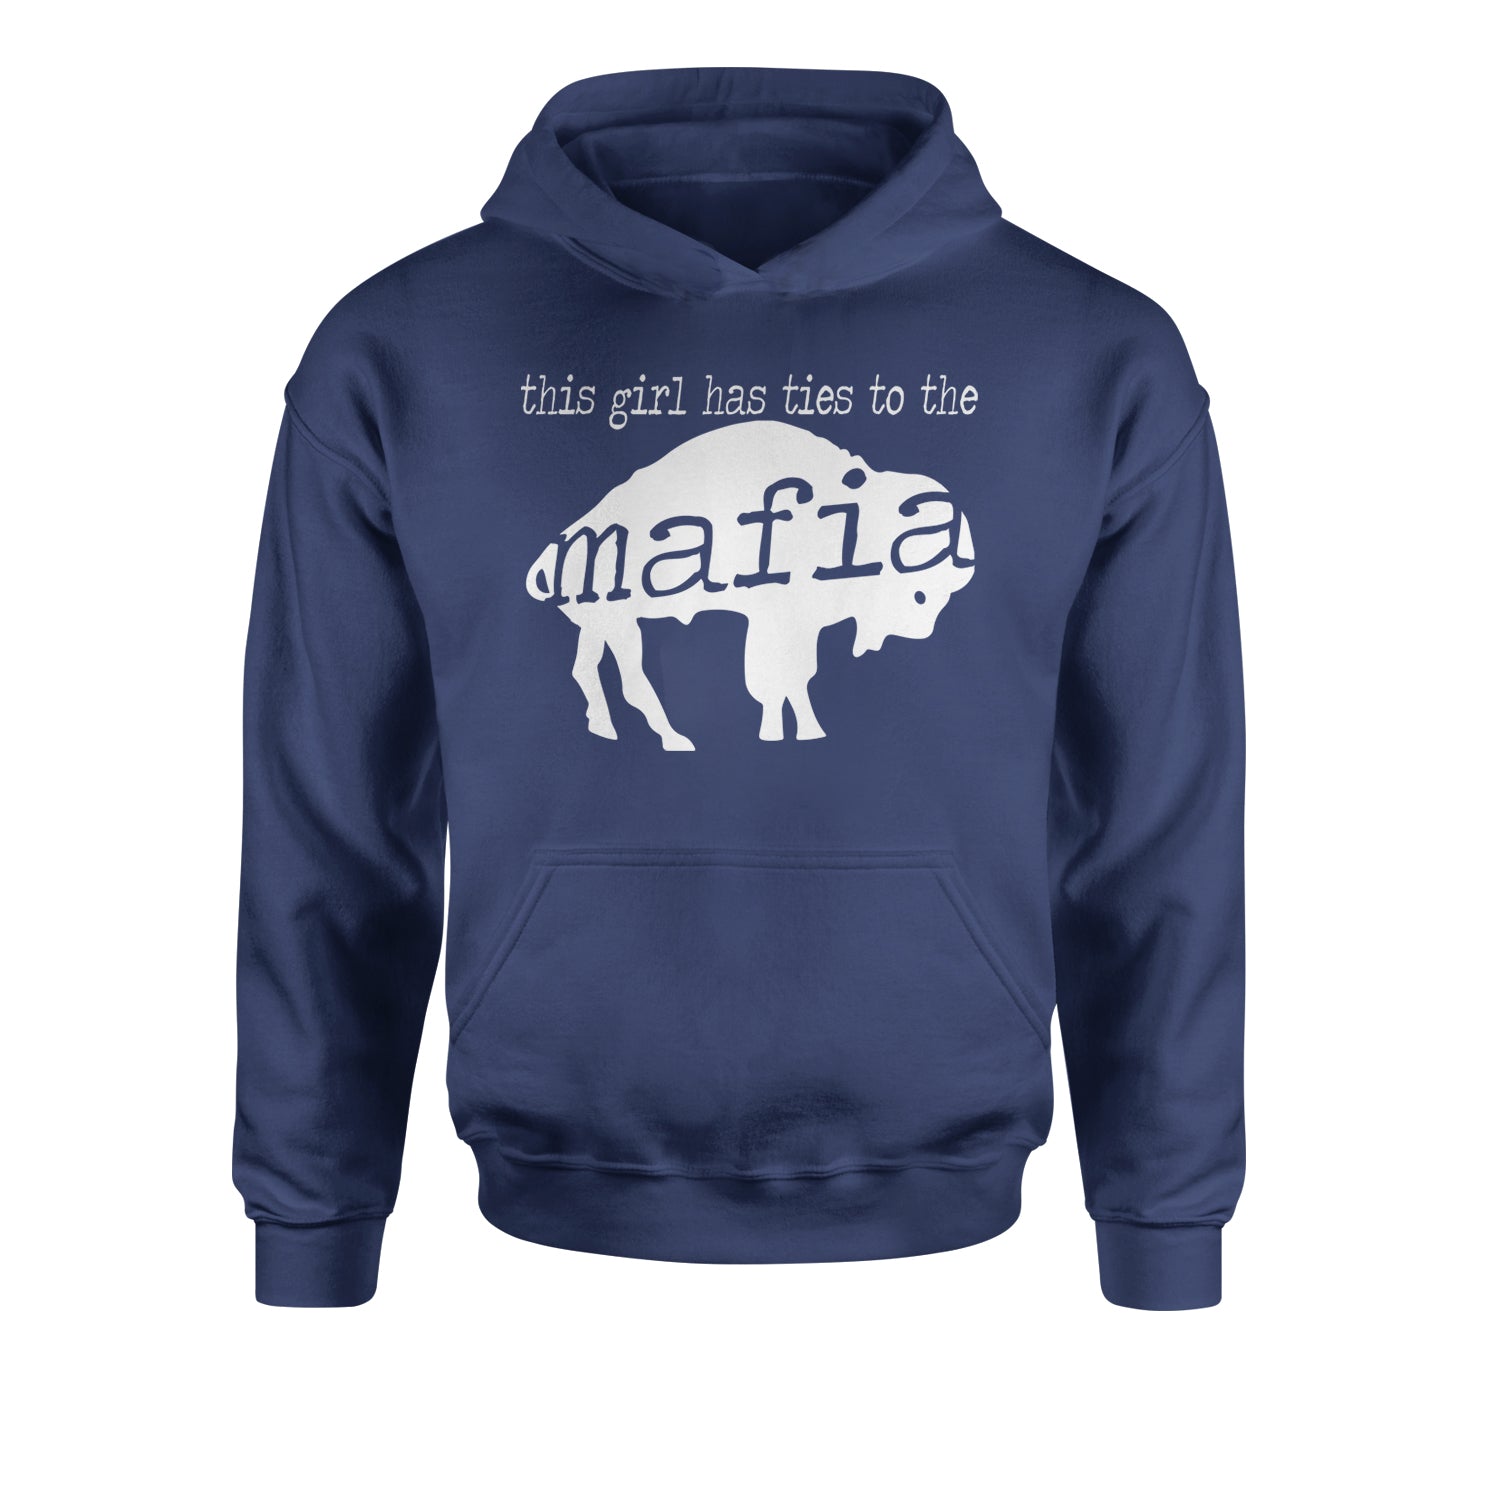 This Girl Has Ties To The Bills Mafia Youth-Sized Hoodie bills, fan, football, new, sports, team, york by Expression Tees